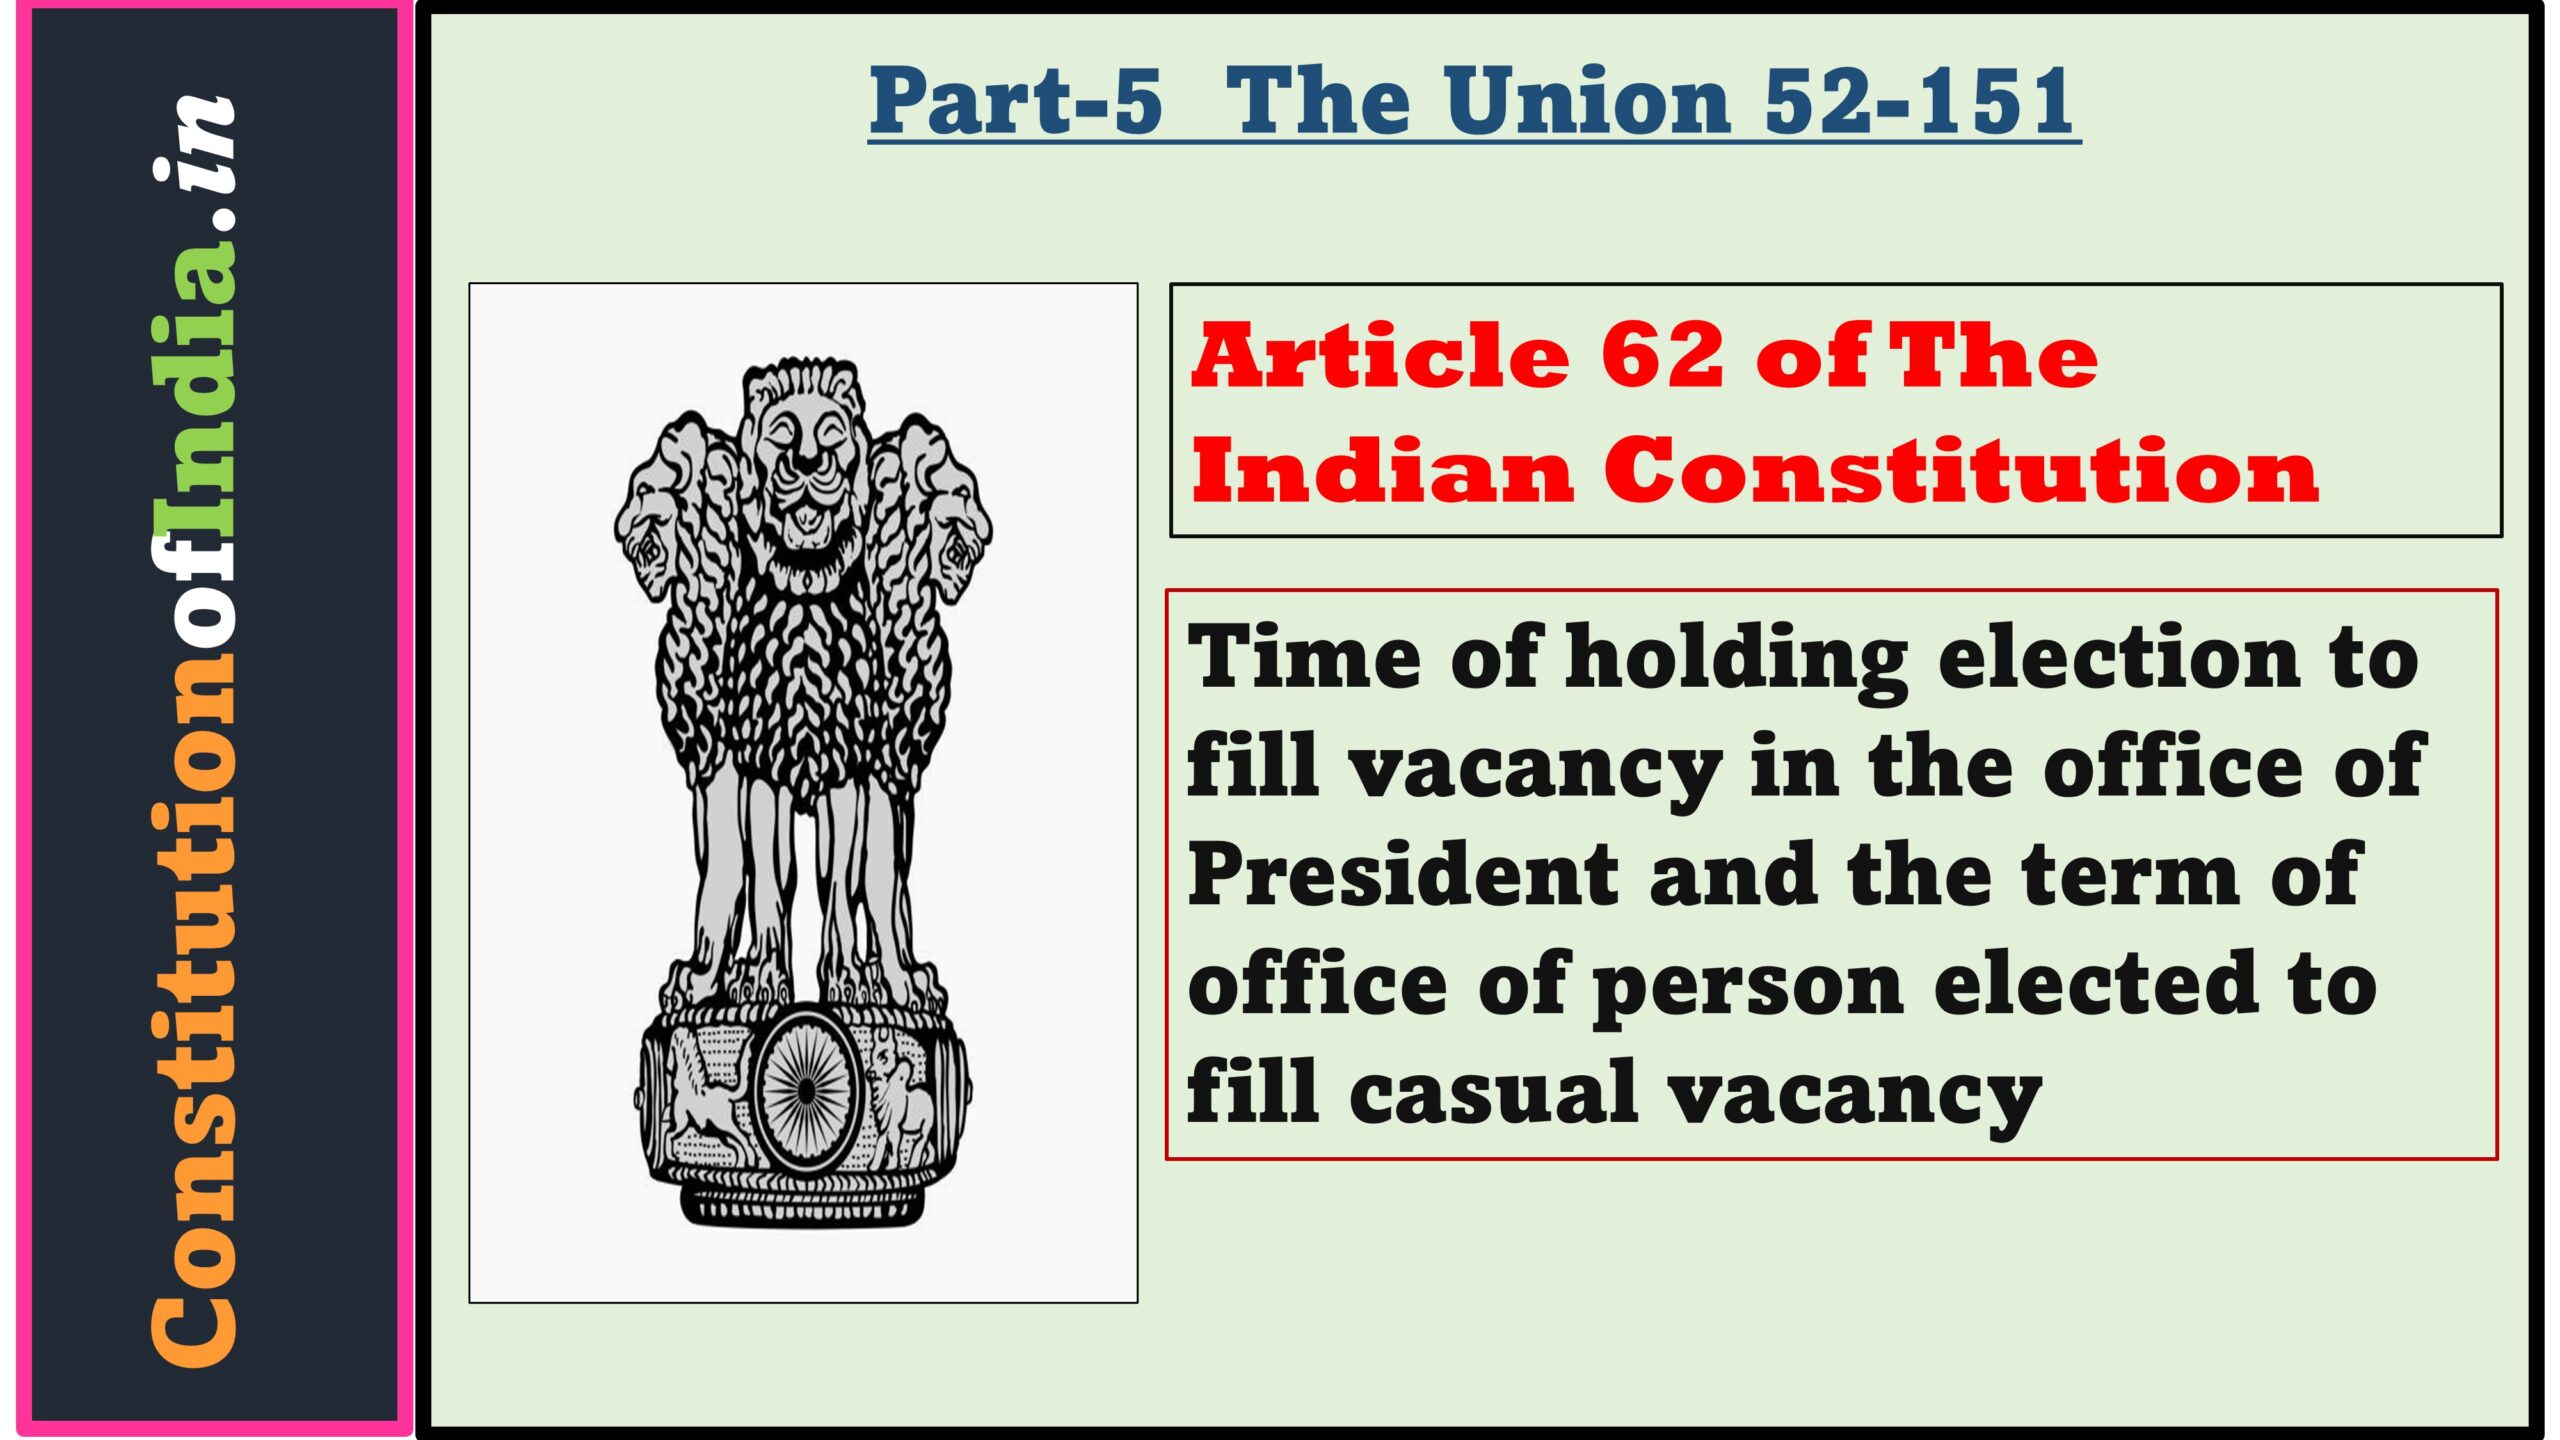 Article 62 of Indian Constitution